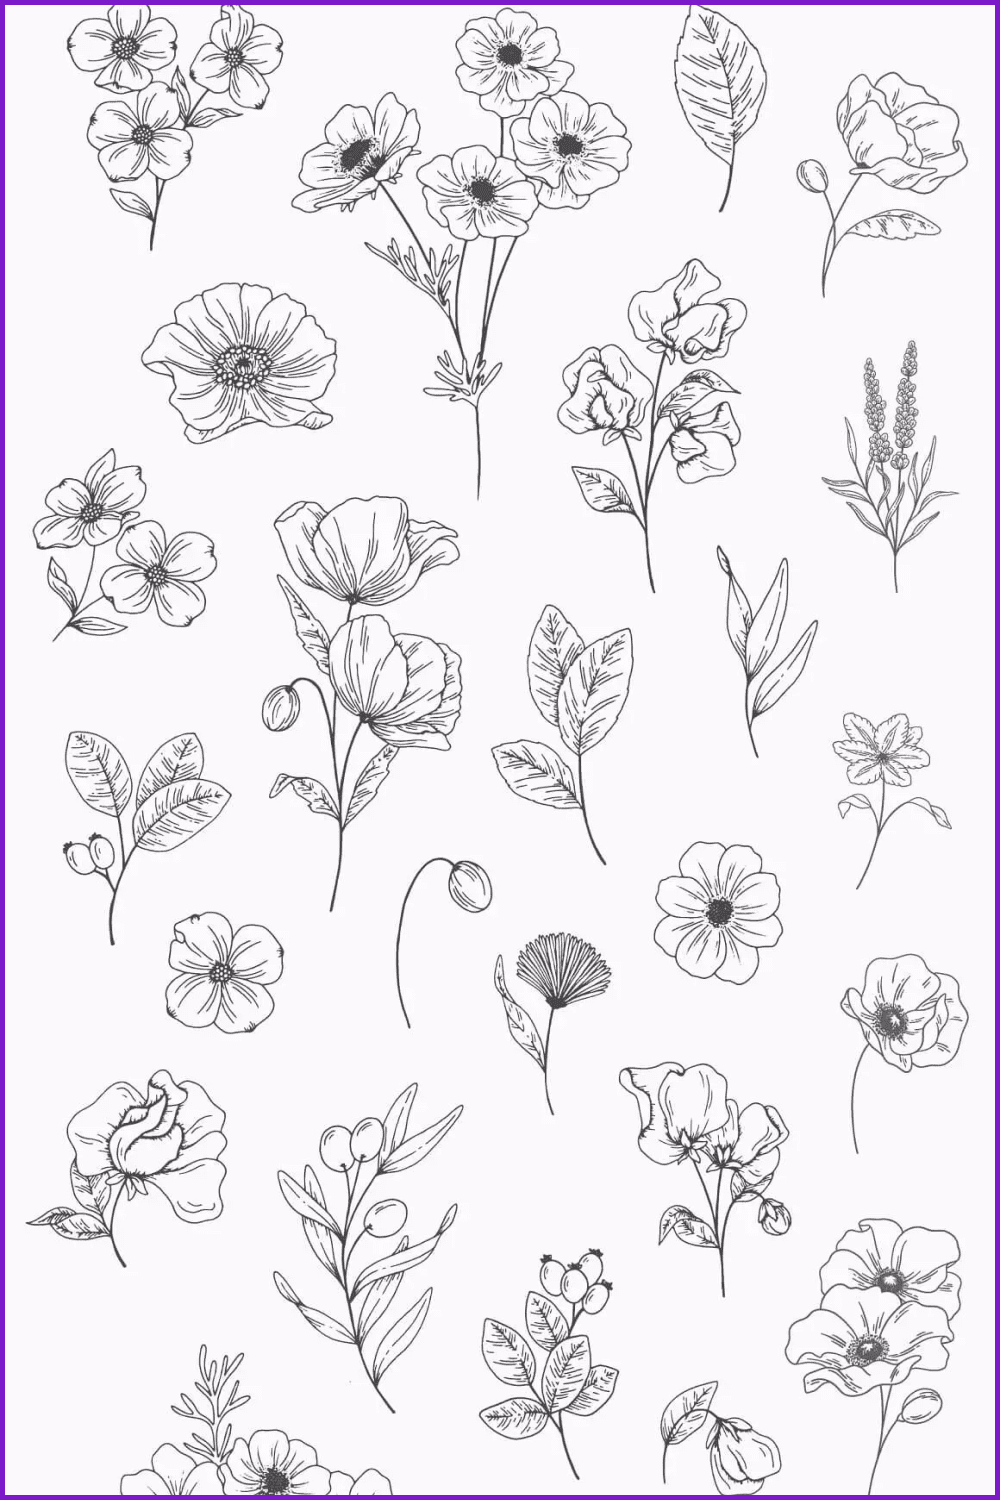 Minimalistic and simple black and white drawings of poppies.